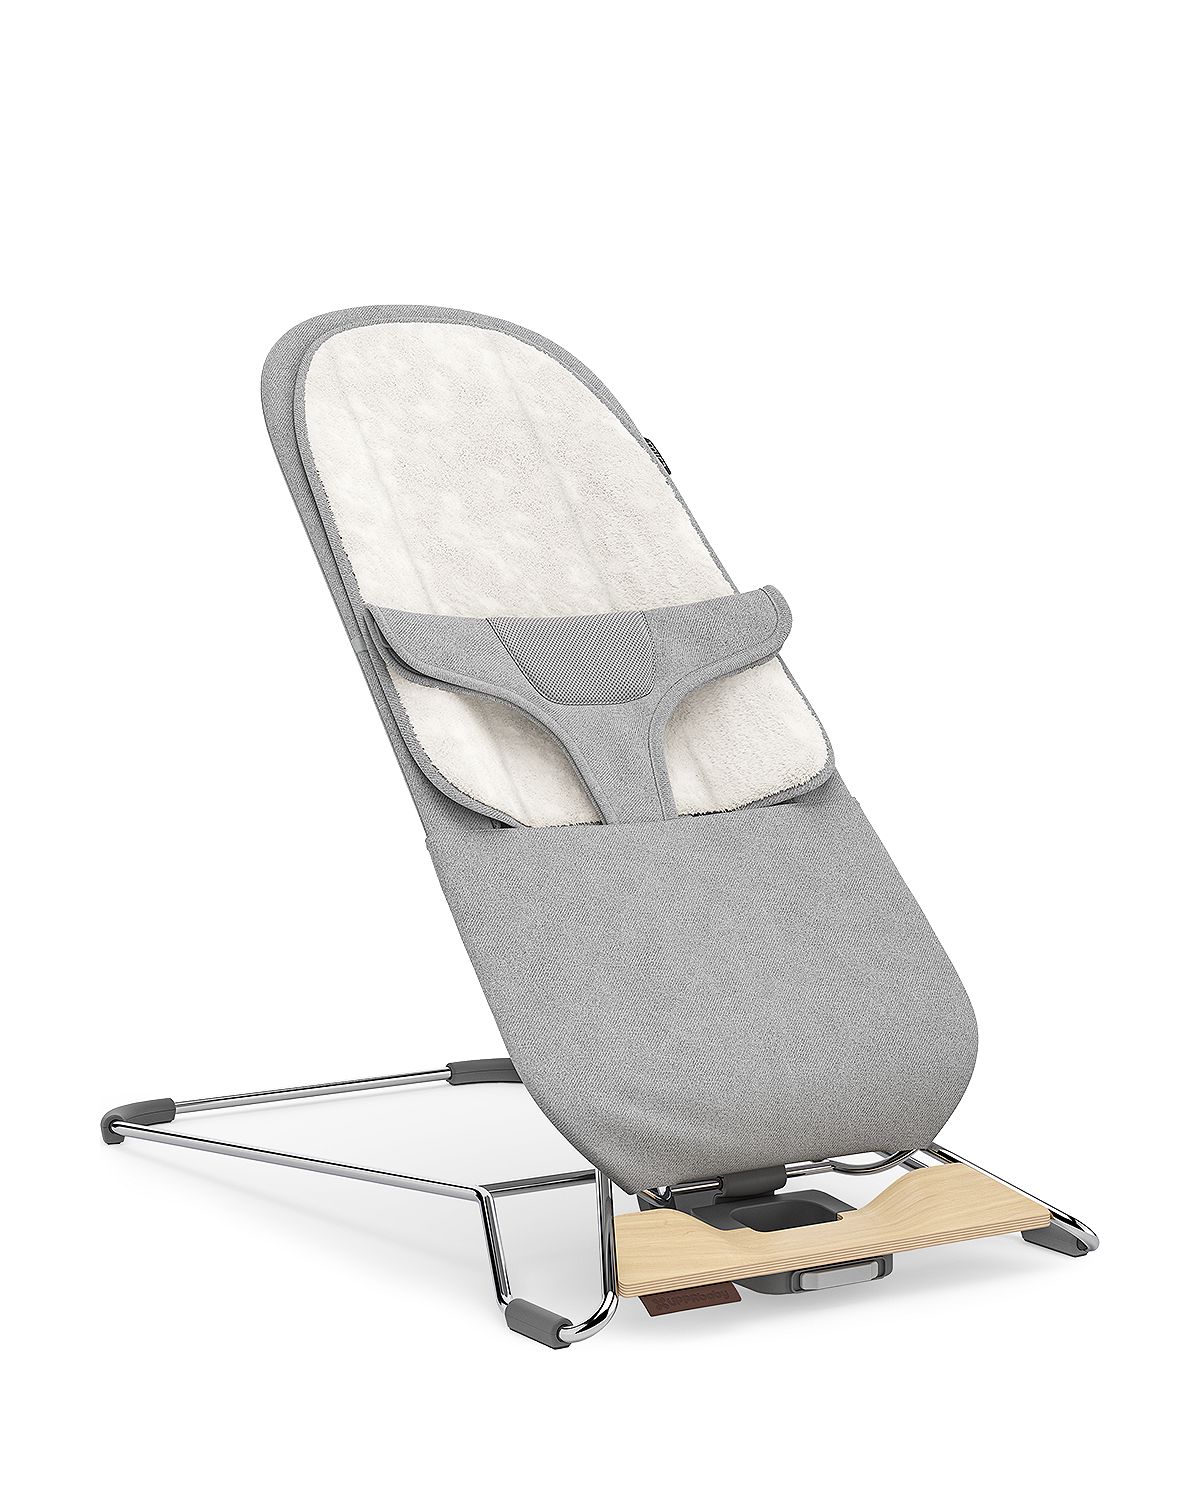 UPPAbaby - Mira 2 in 1 Bouncer and Seat